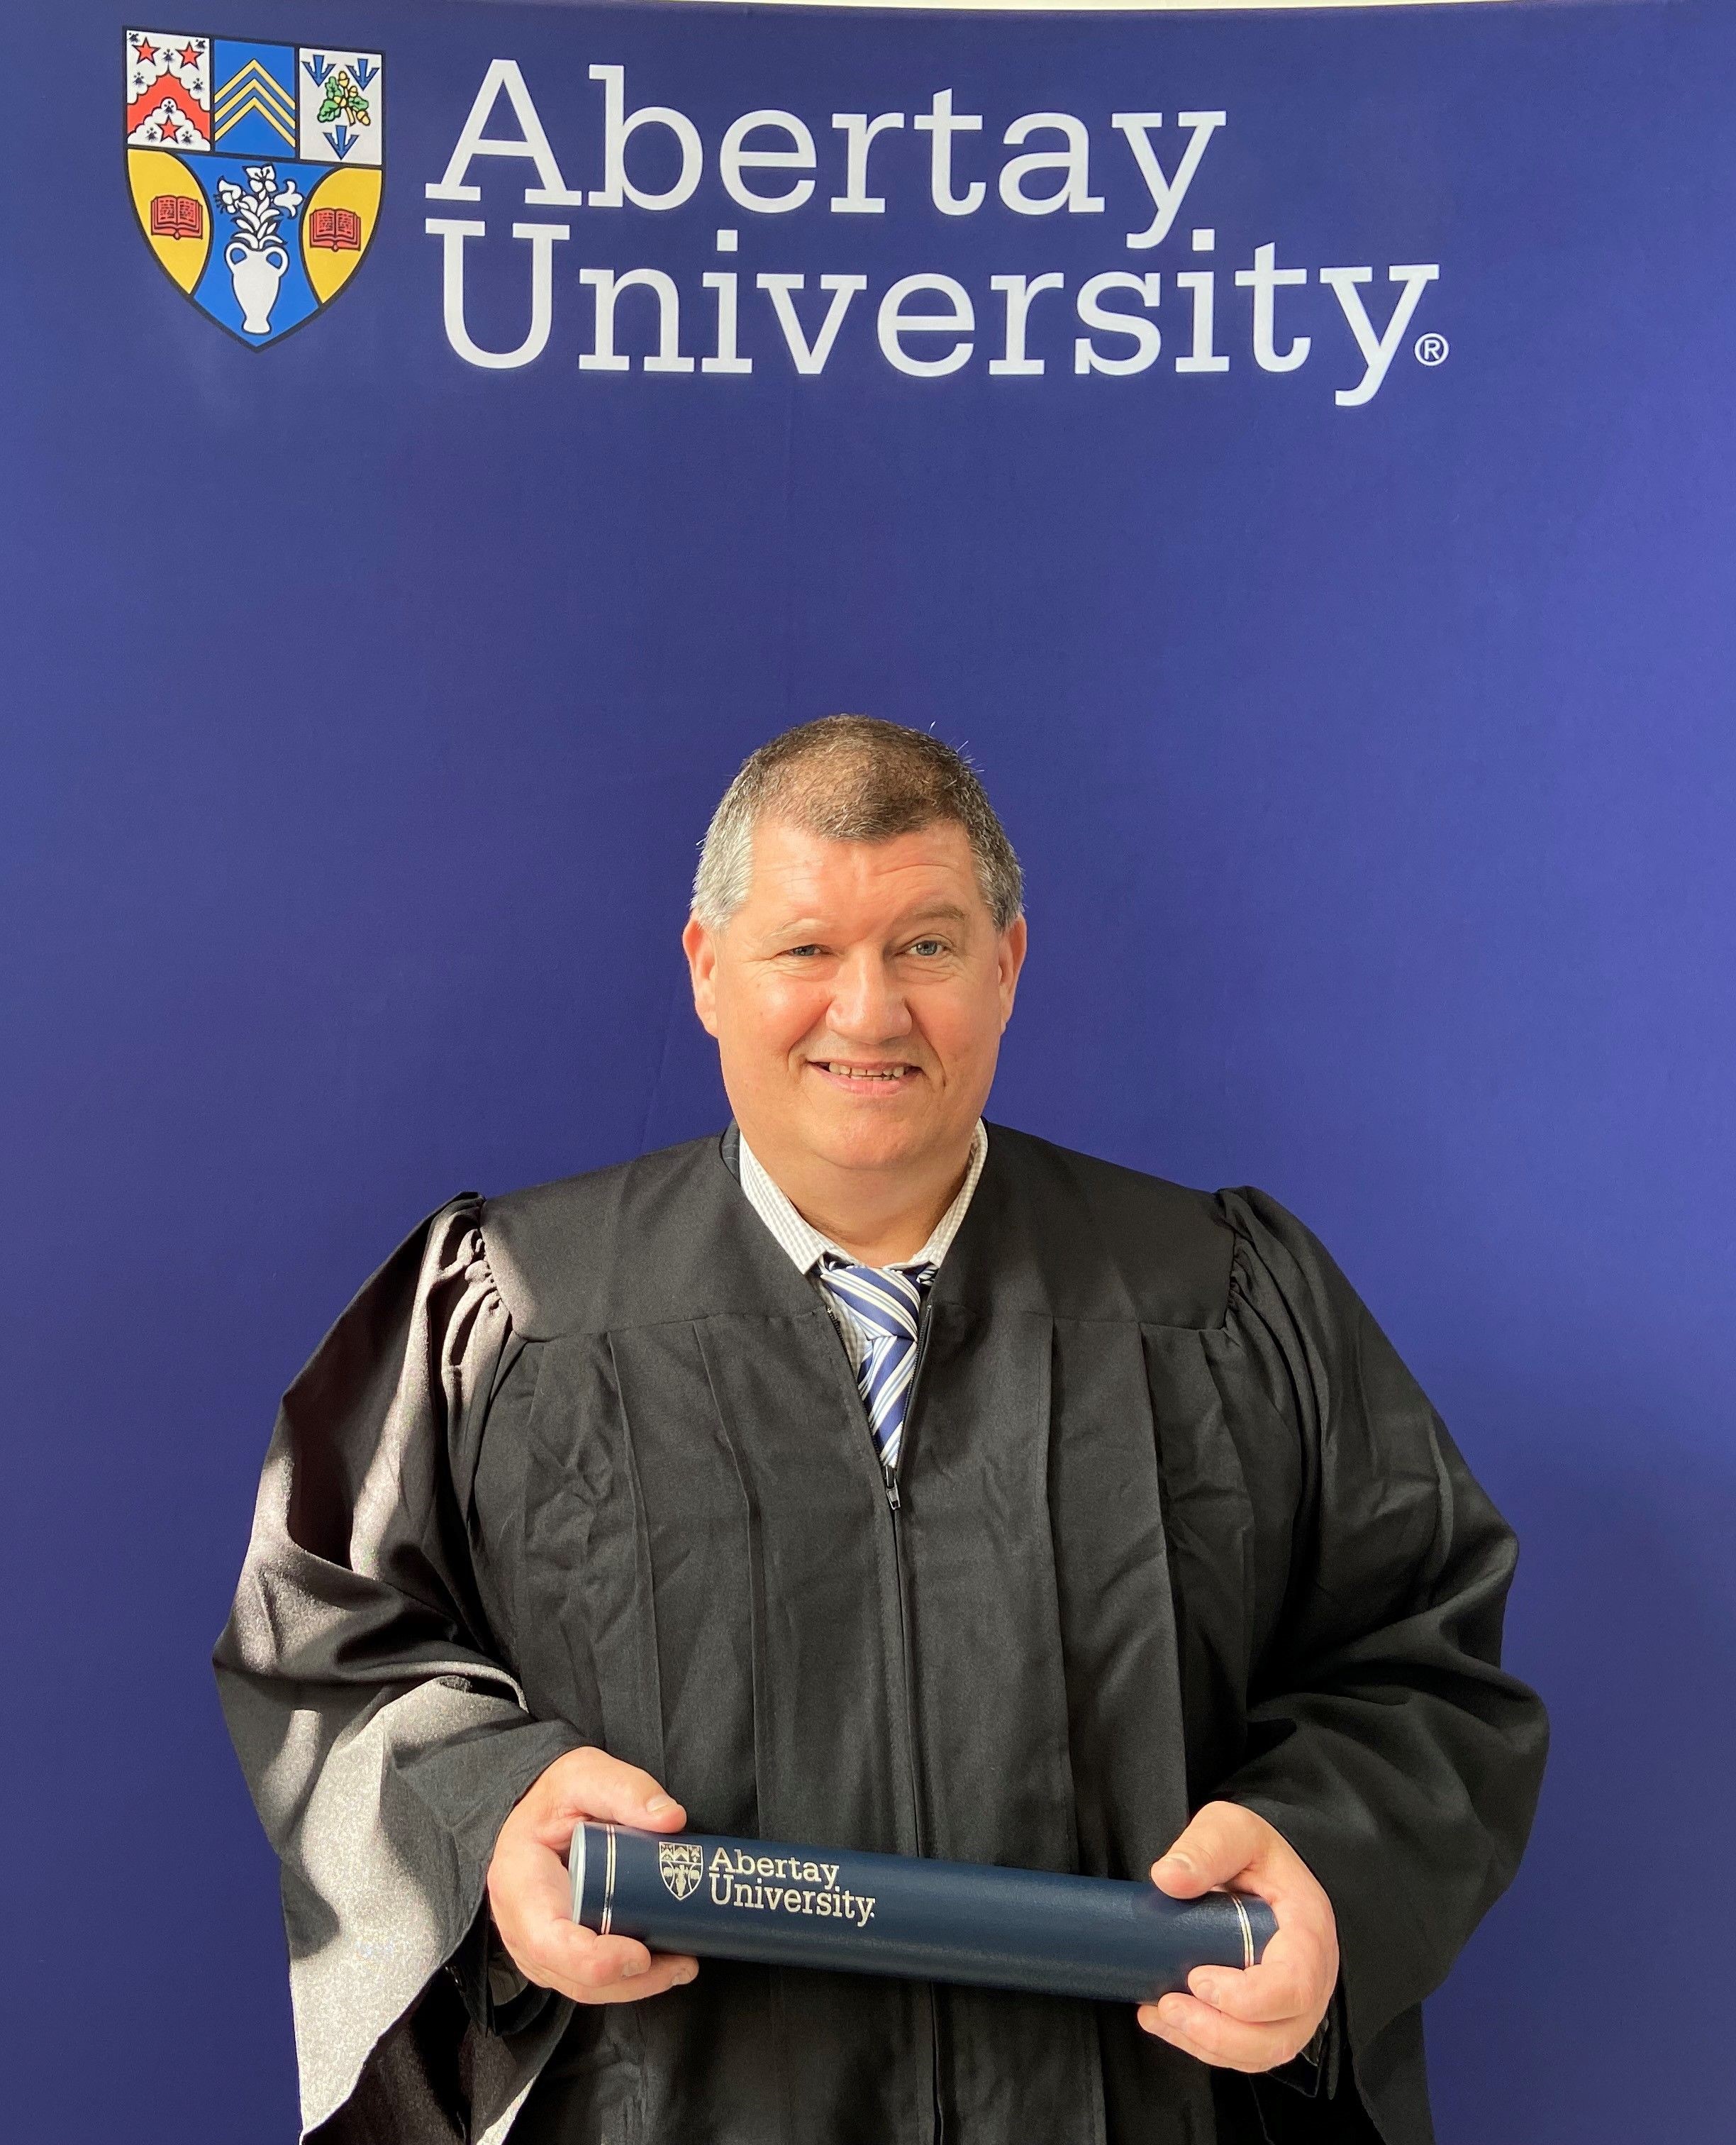 Man comes back from brink of death to earn law degree